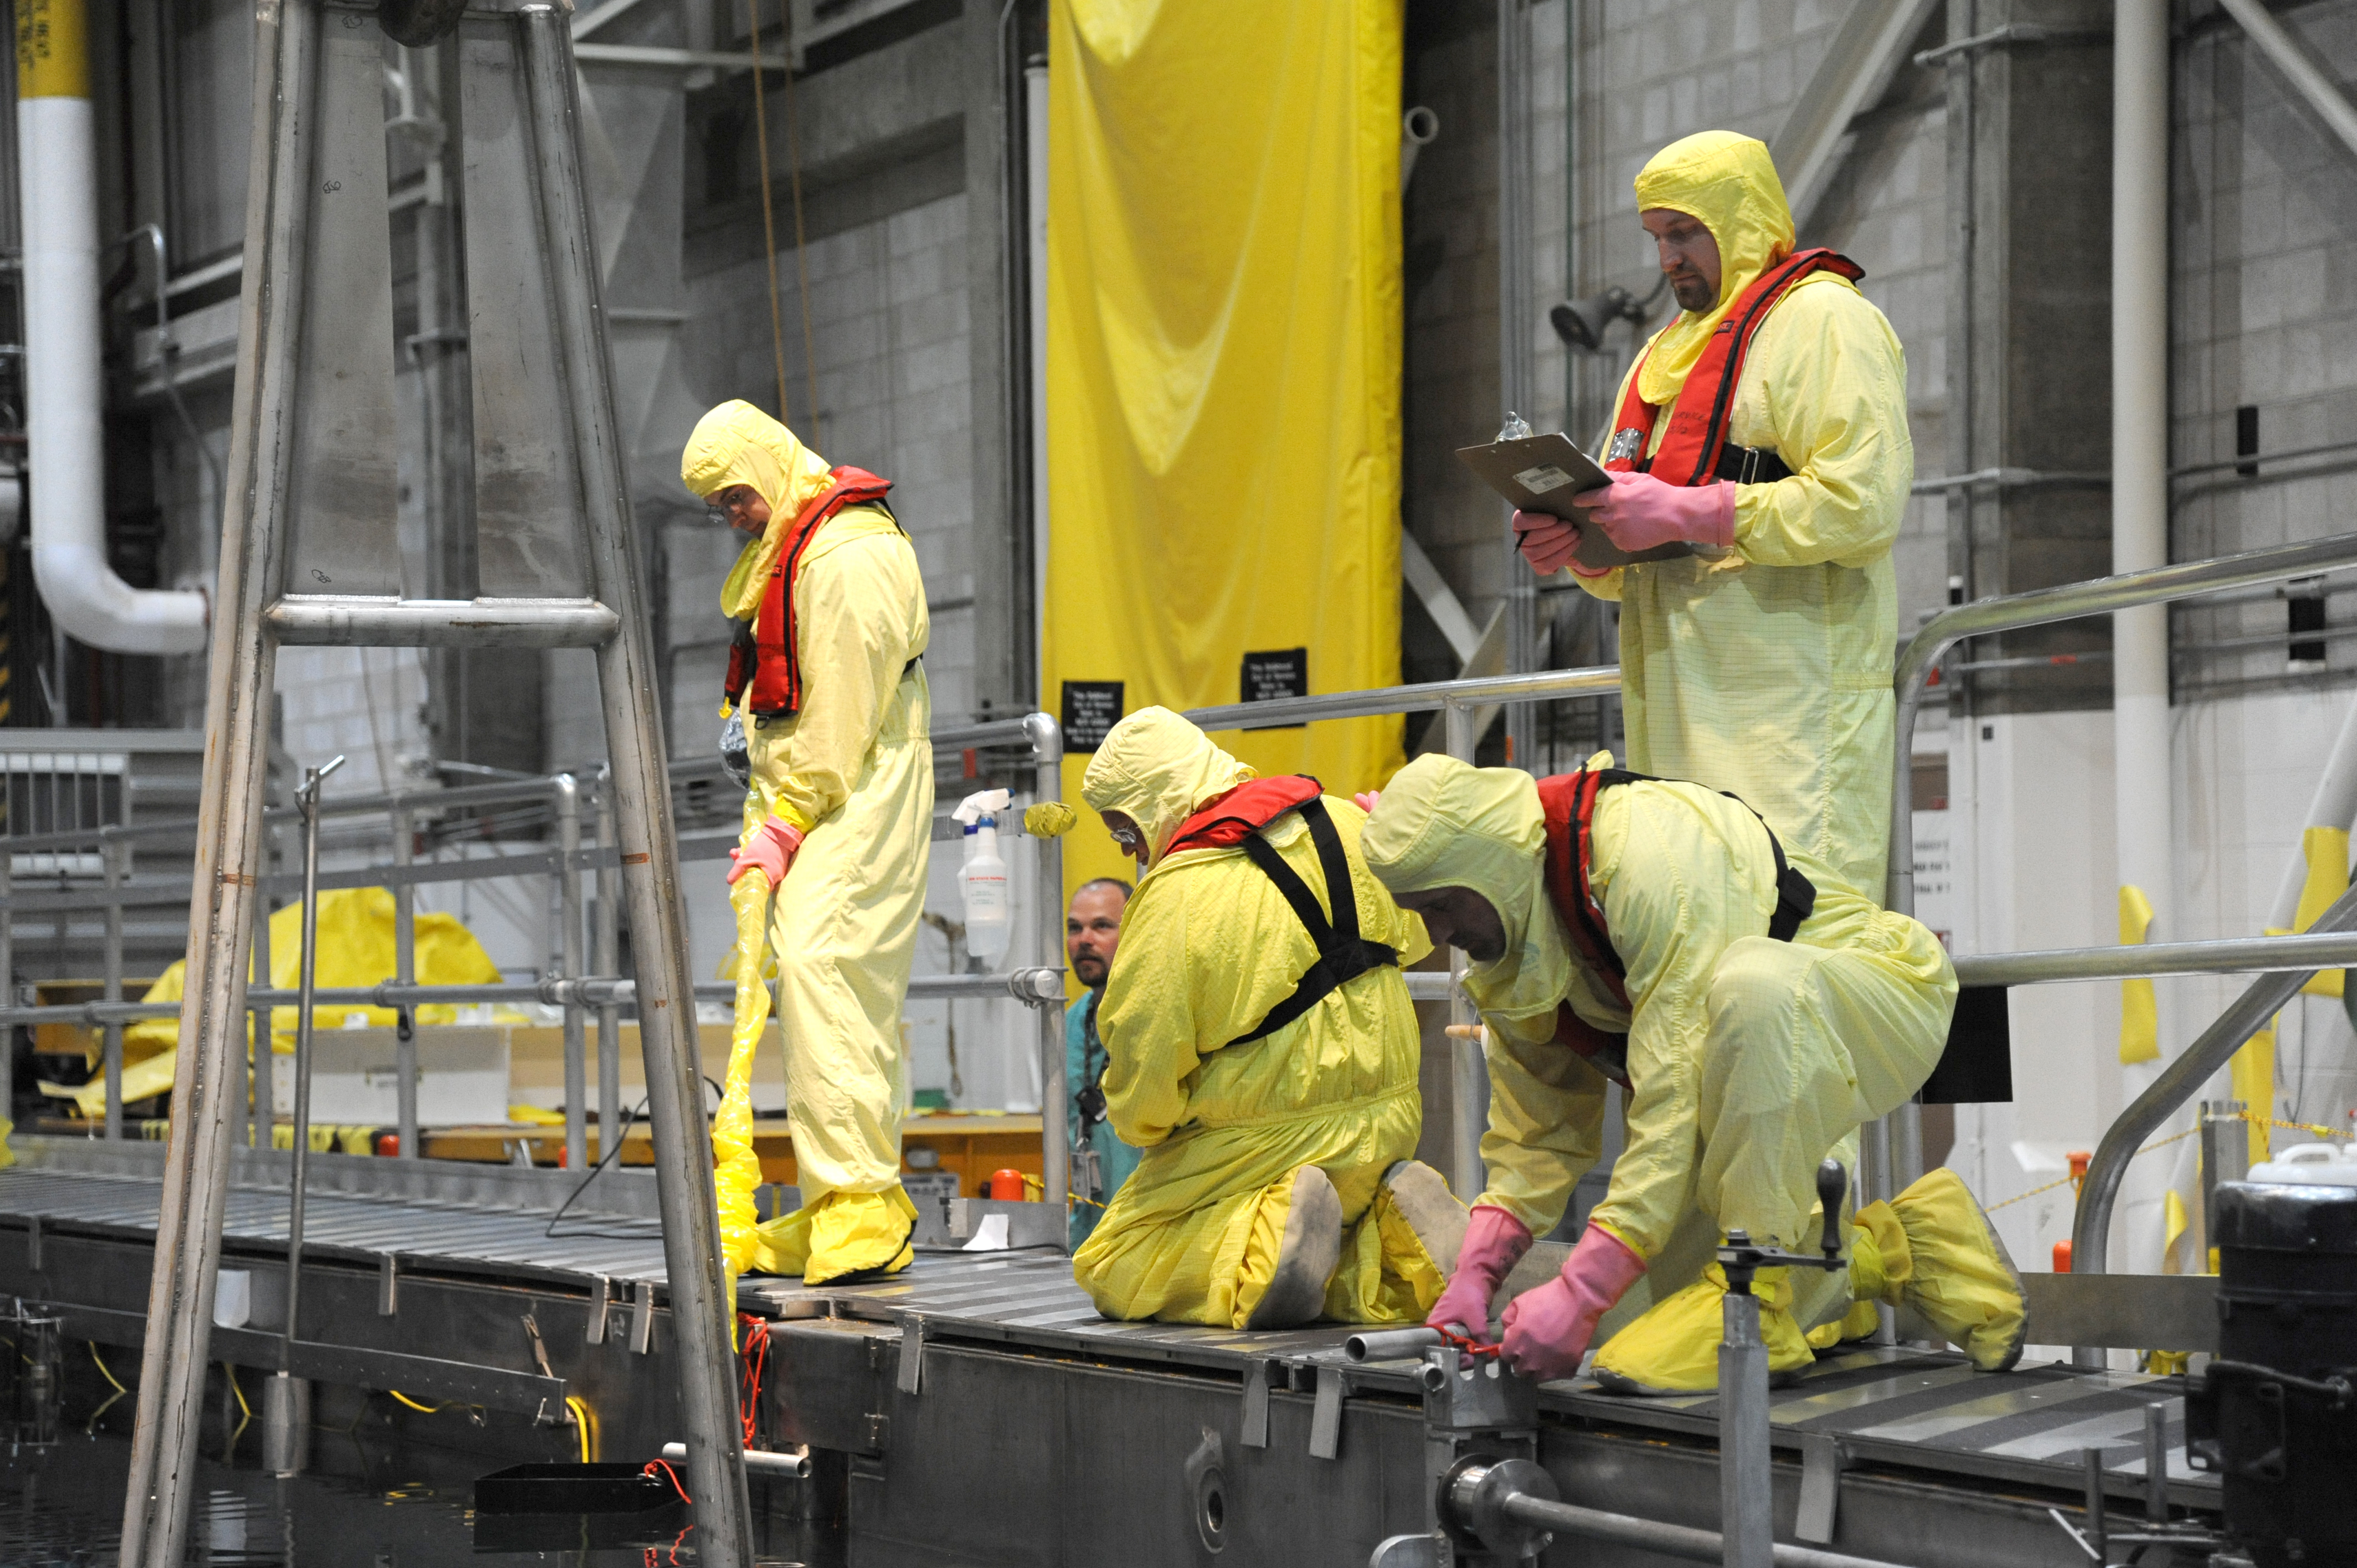 People working on a nuclear reactor